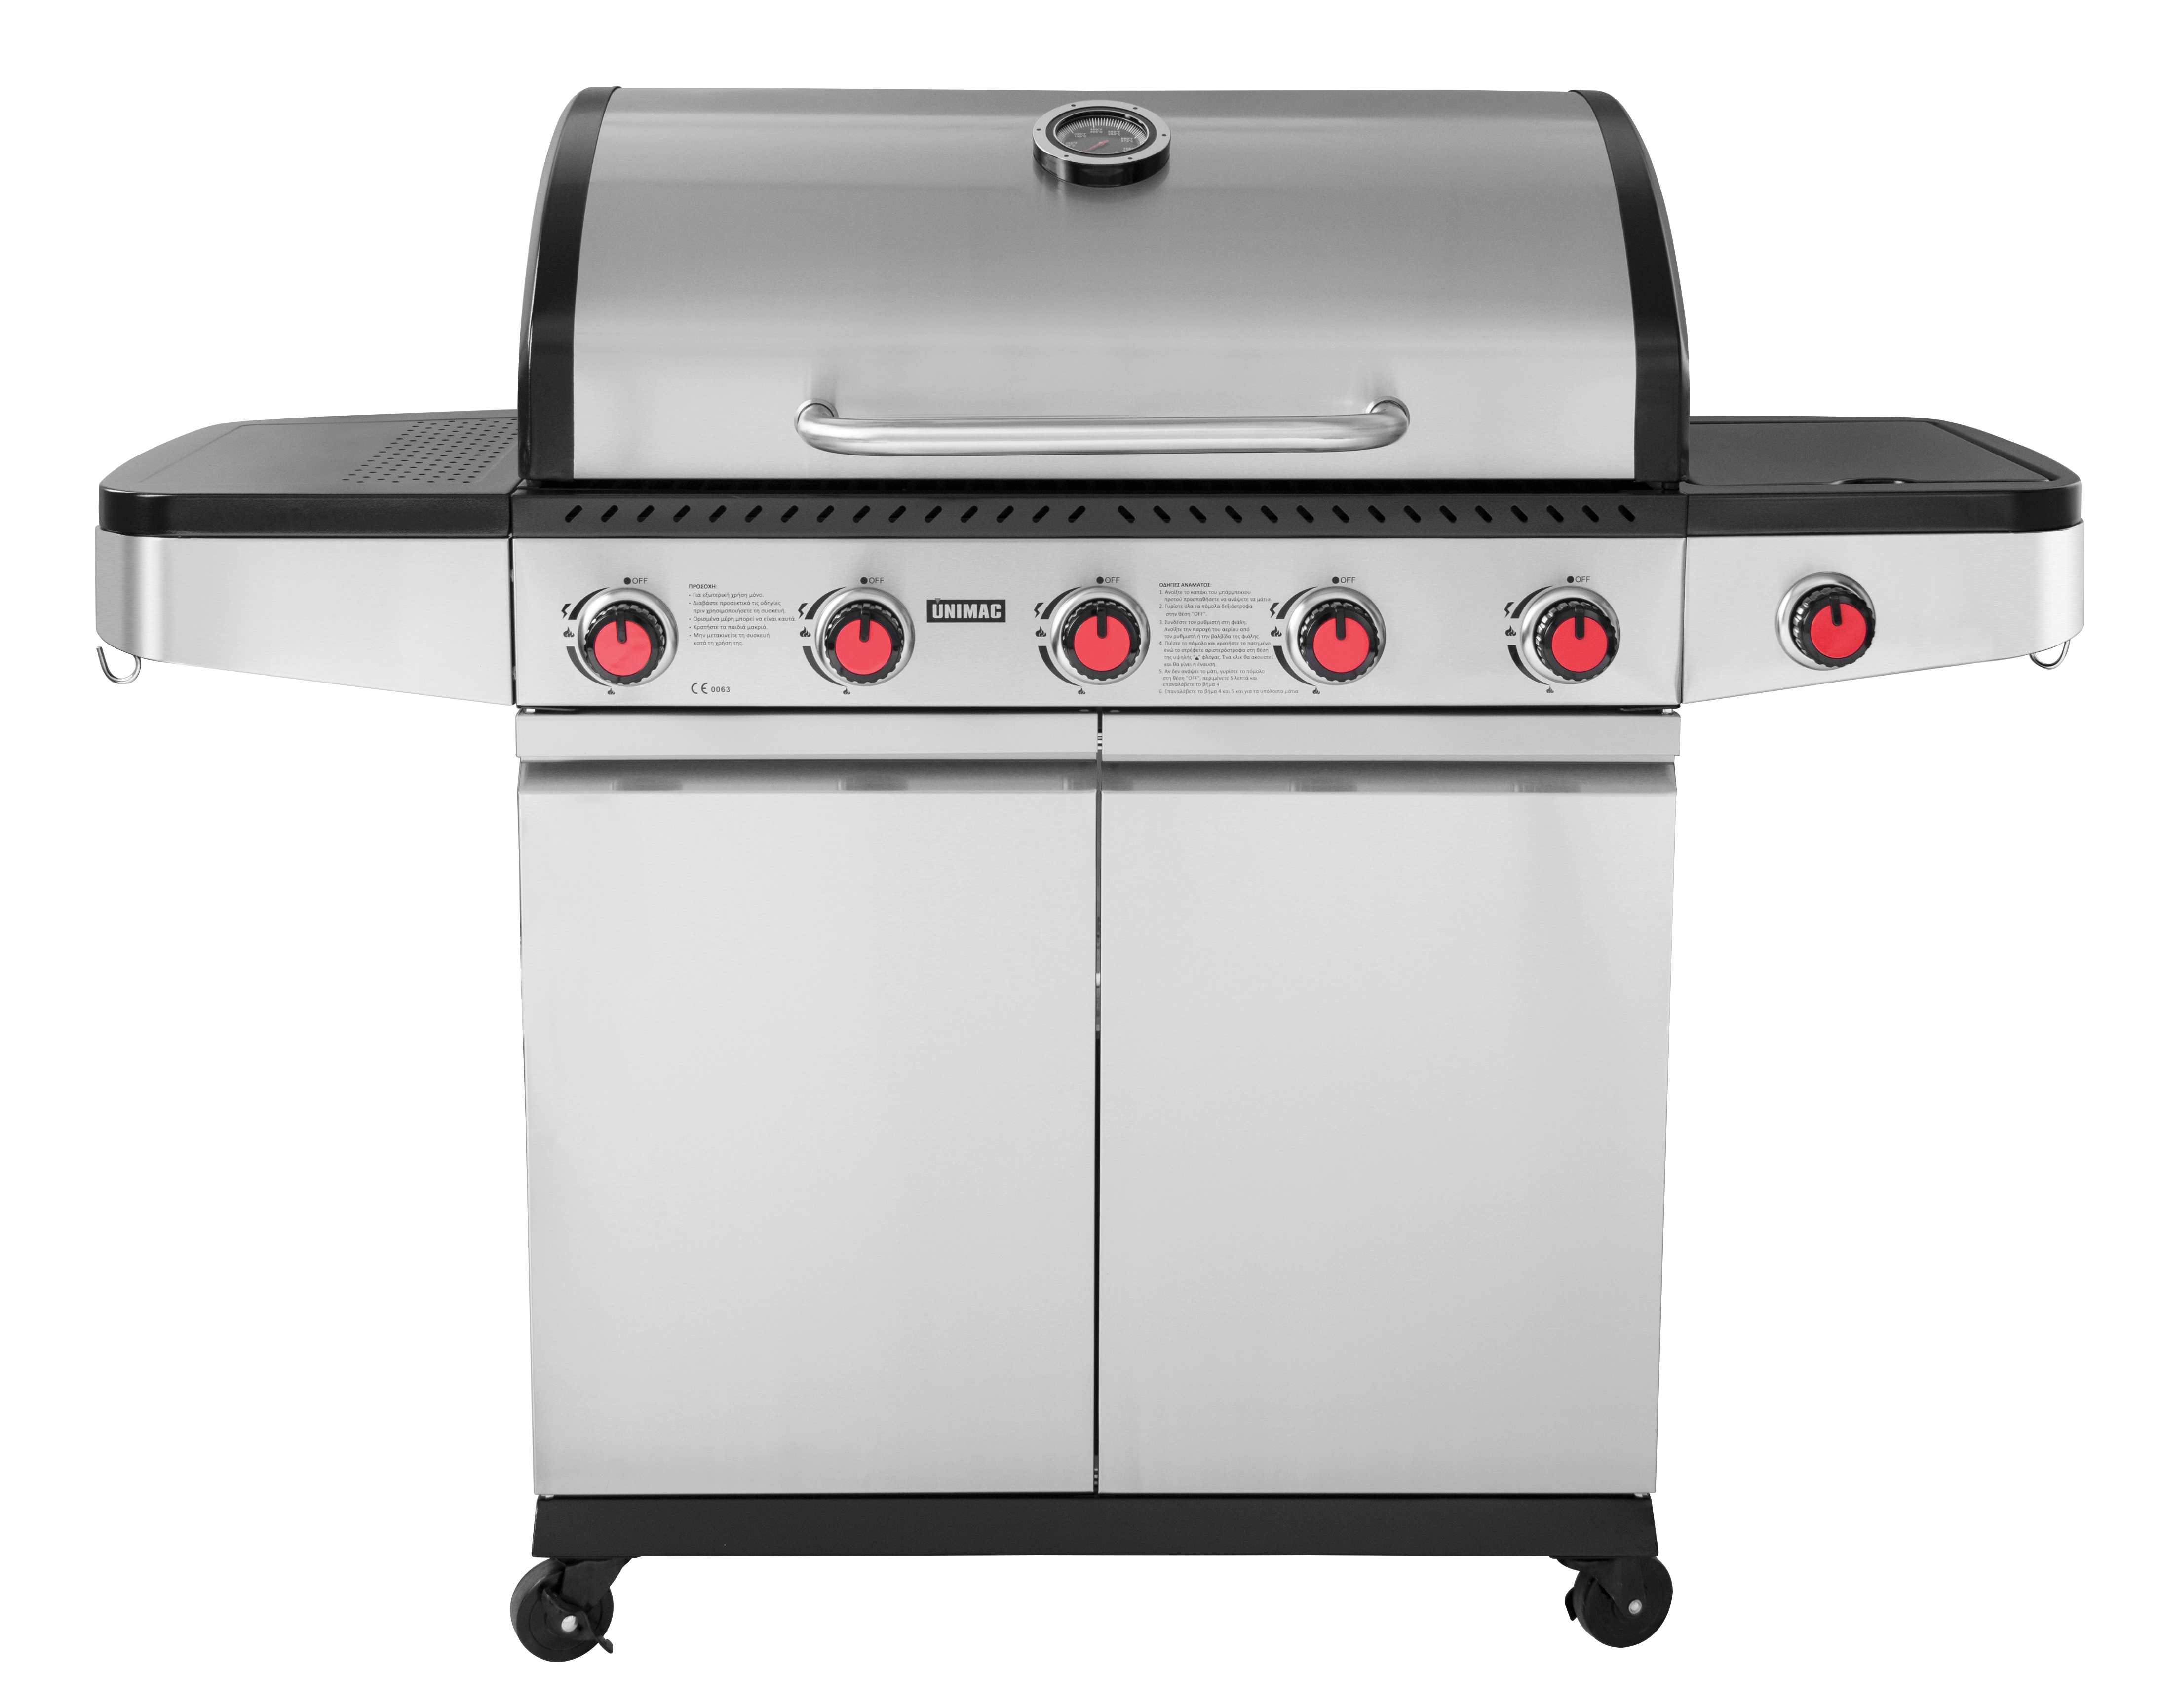 Gas Barbeque Premium INOX with 4 Burners and a side cob Unimac - 1